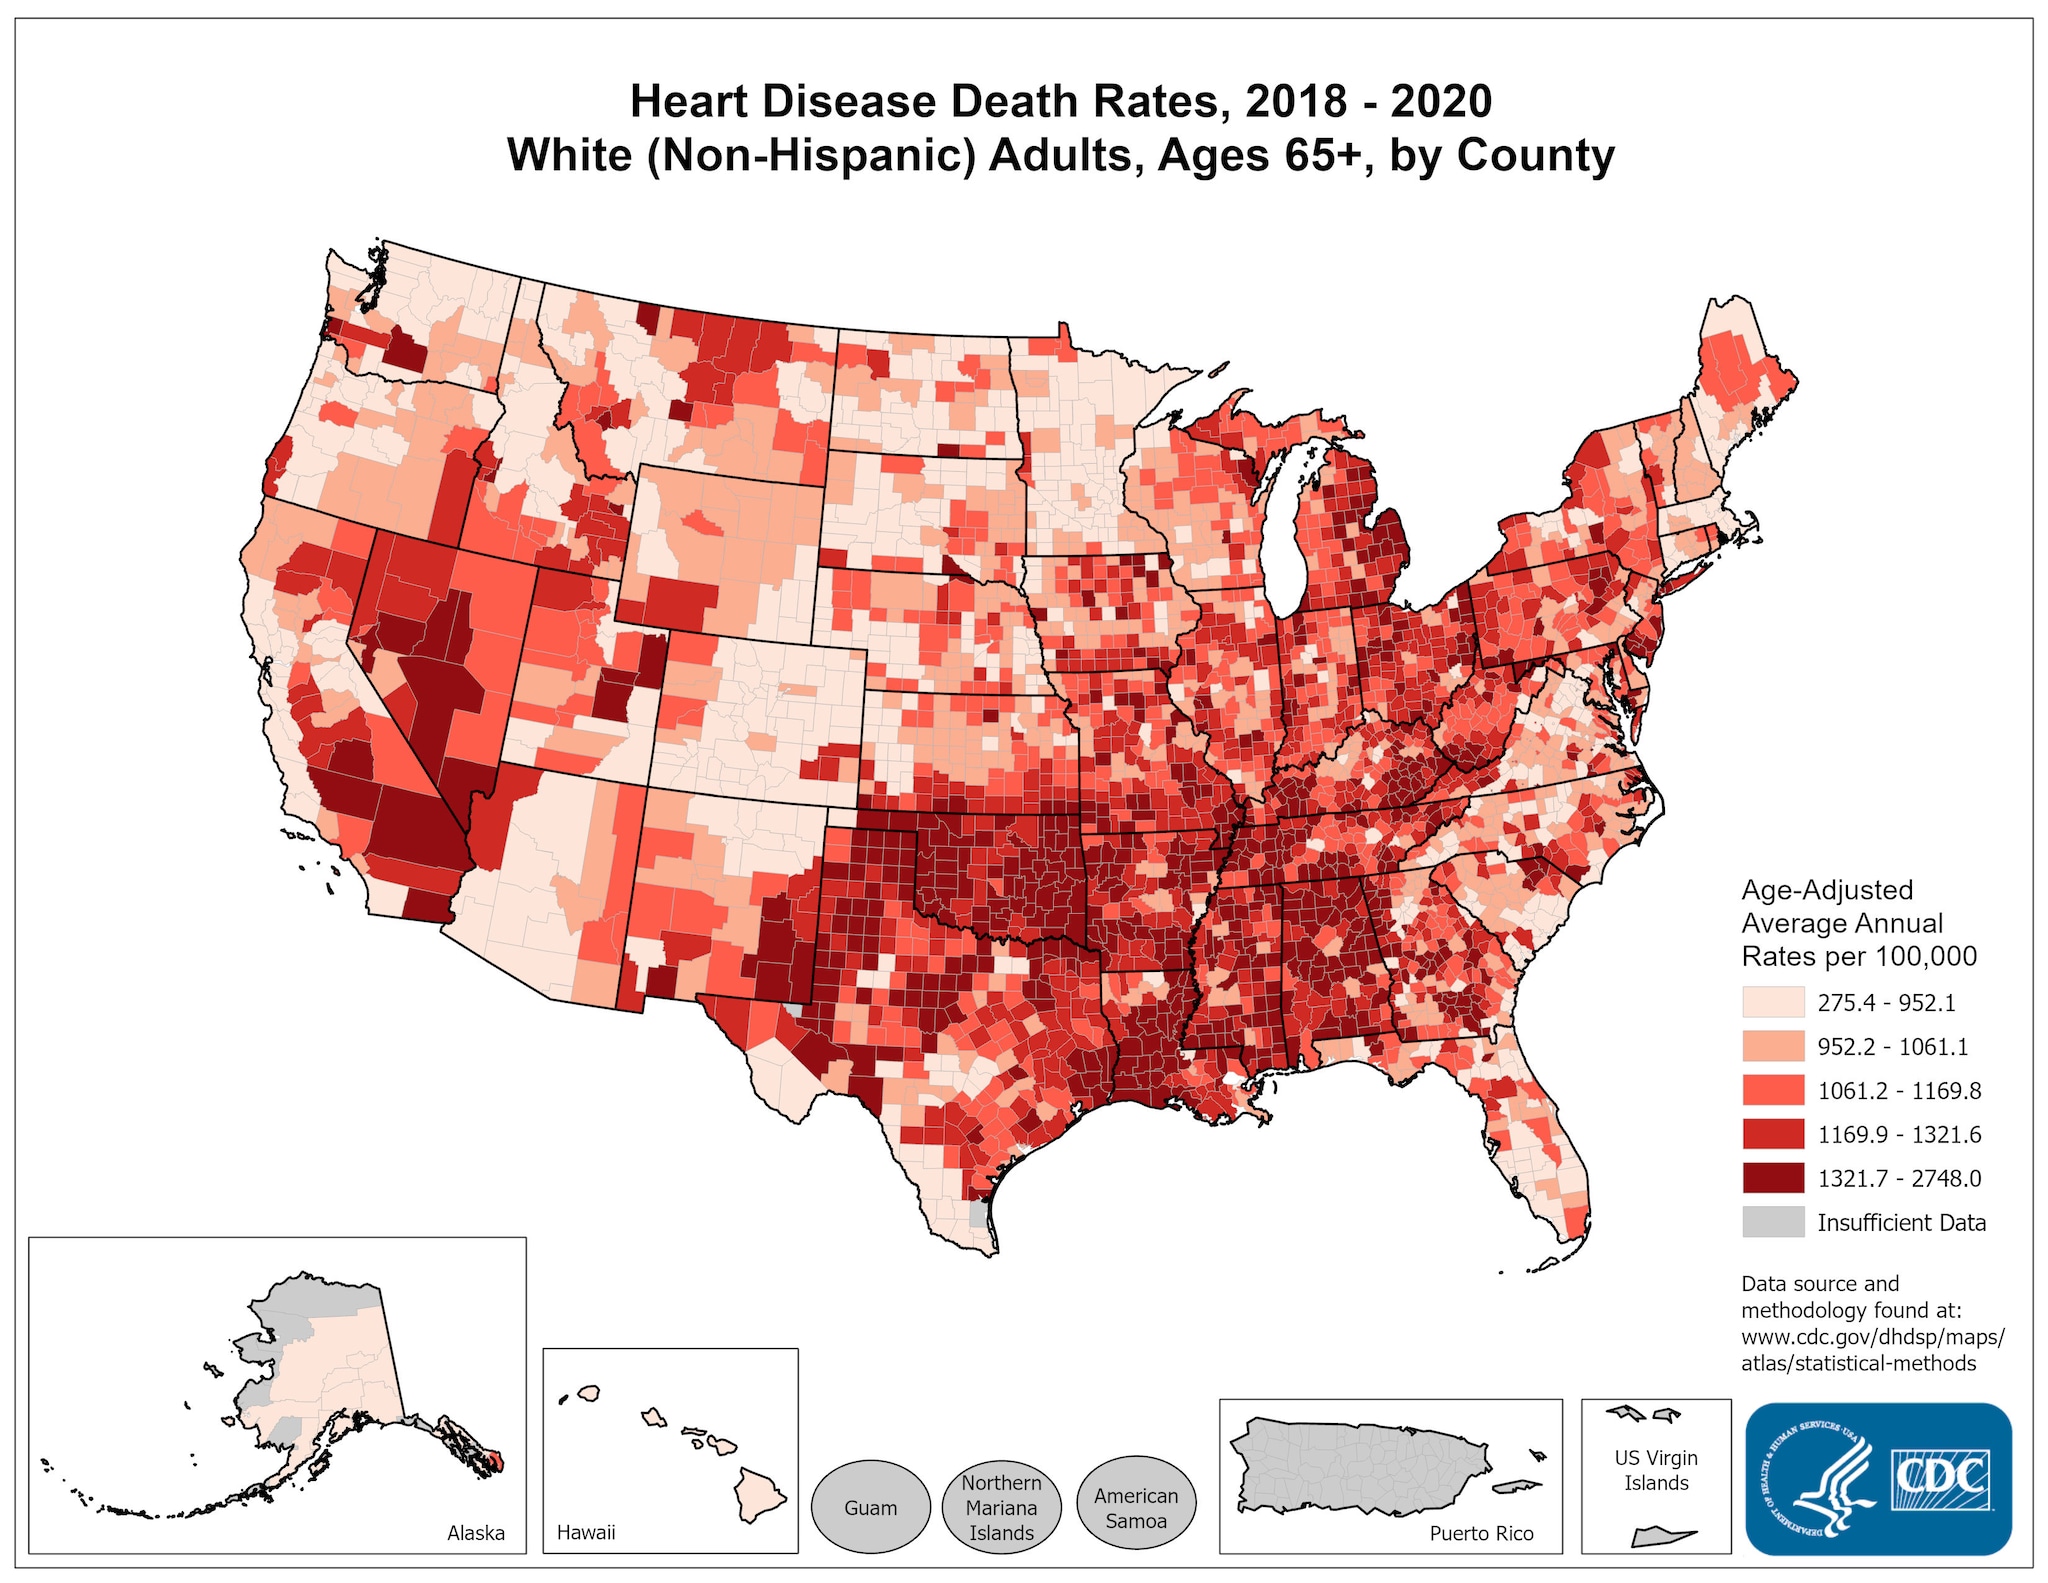 Heart Disease Death Rates for 2017 through 2019 for Whites Aged 65 Years and Older by County